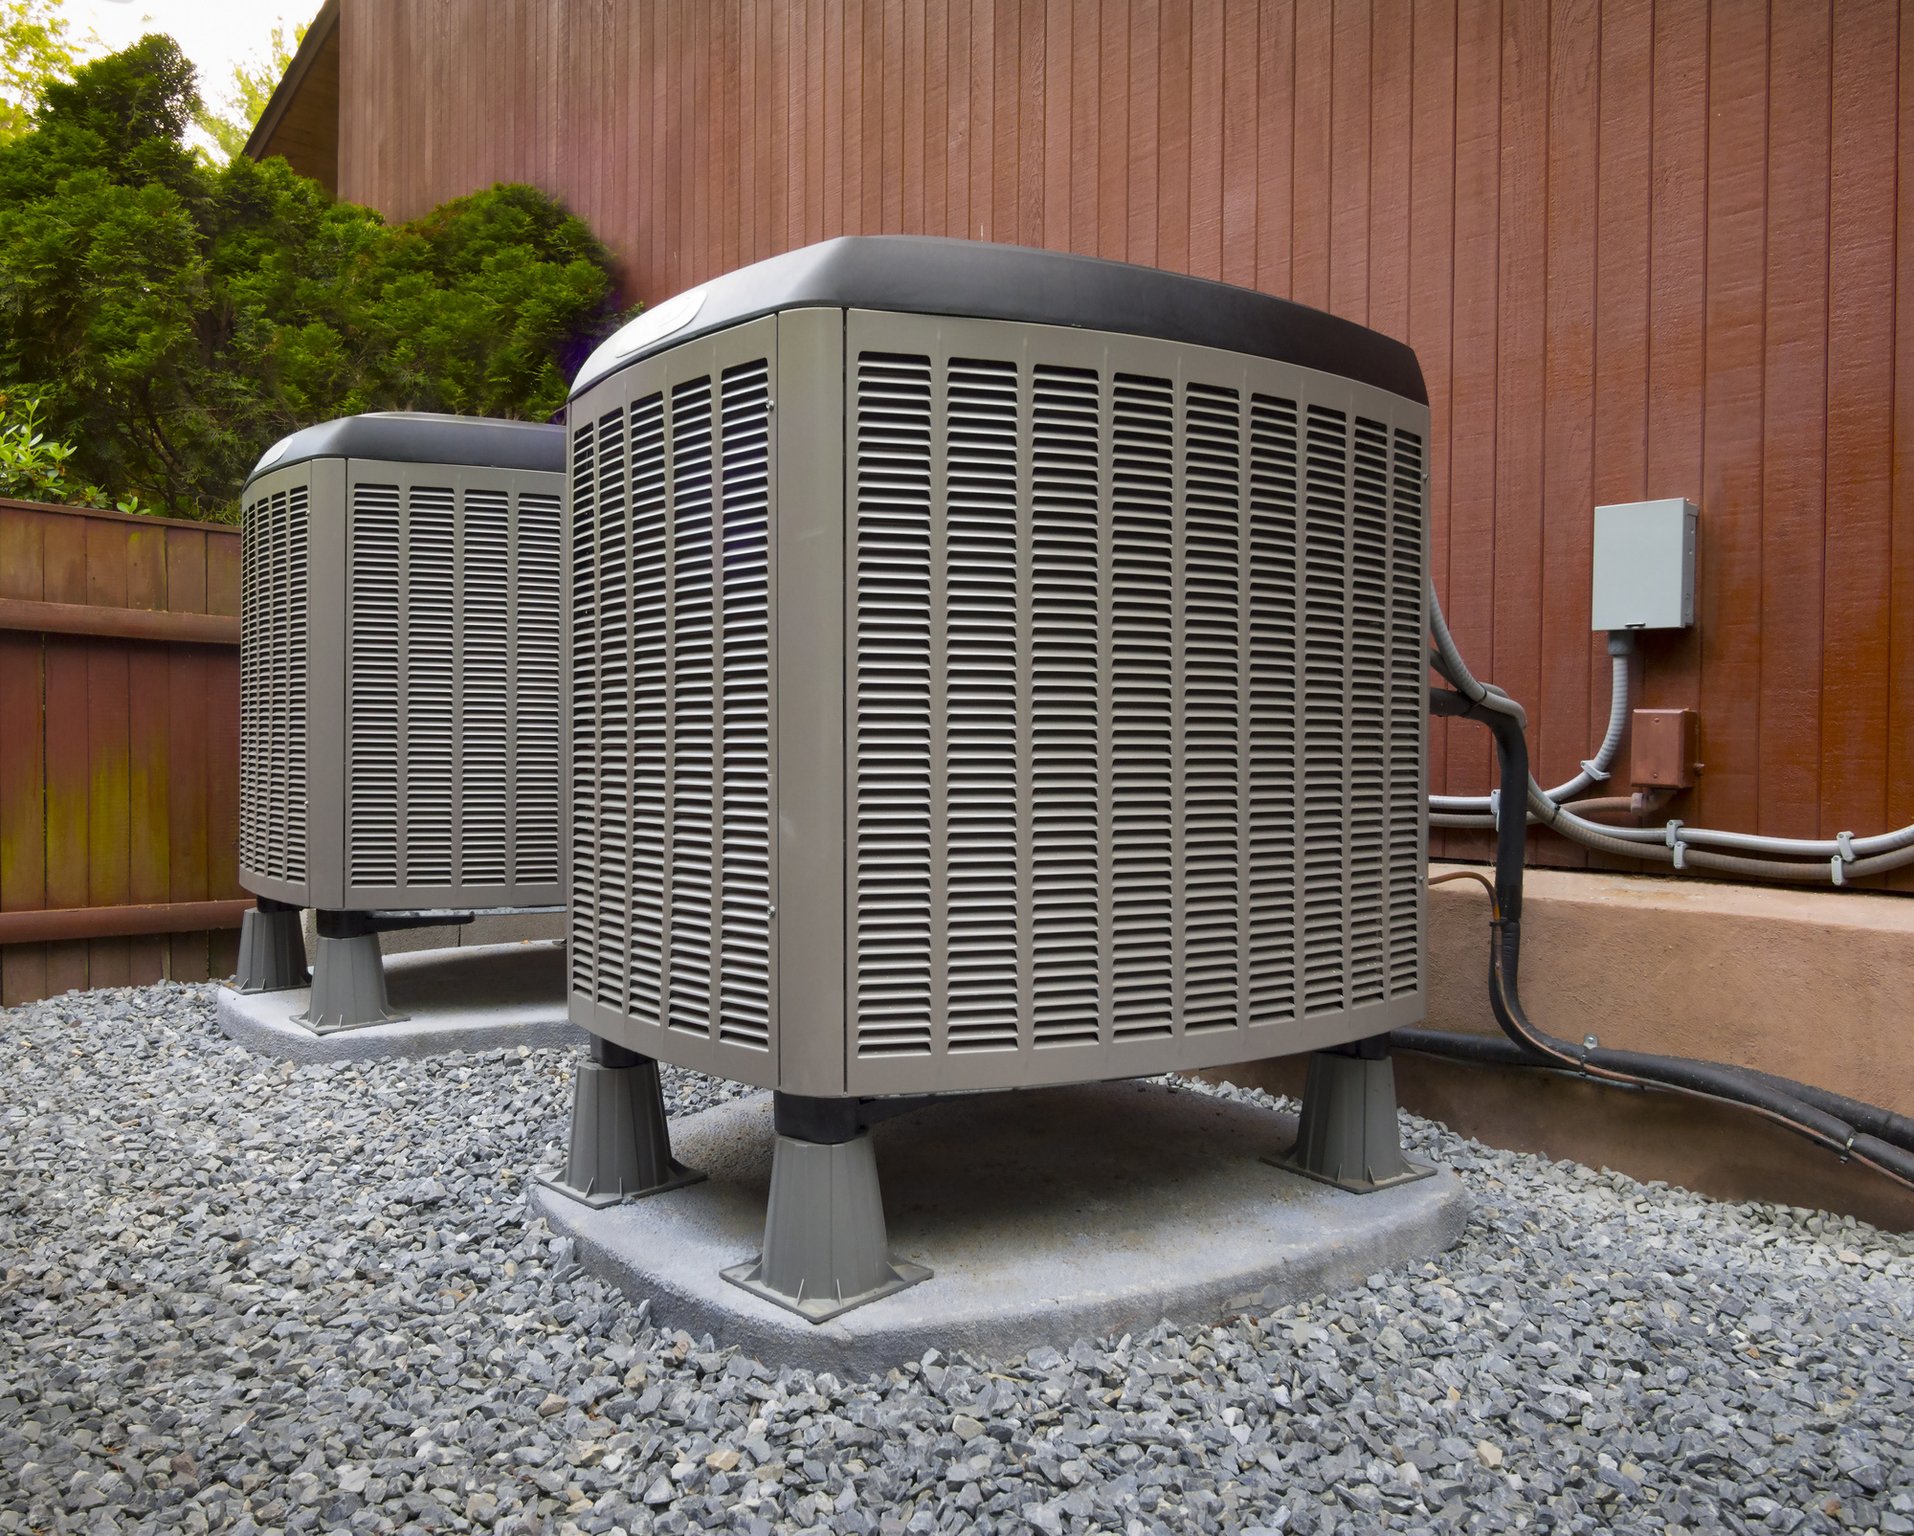 UV in HVAC: The Good, the Bad, and the Air Quality